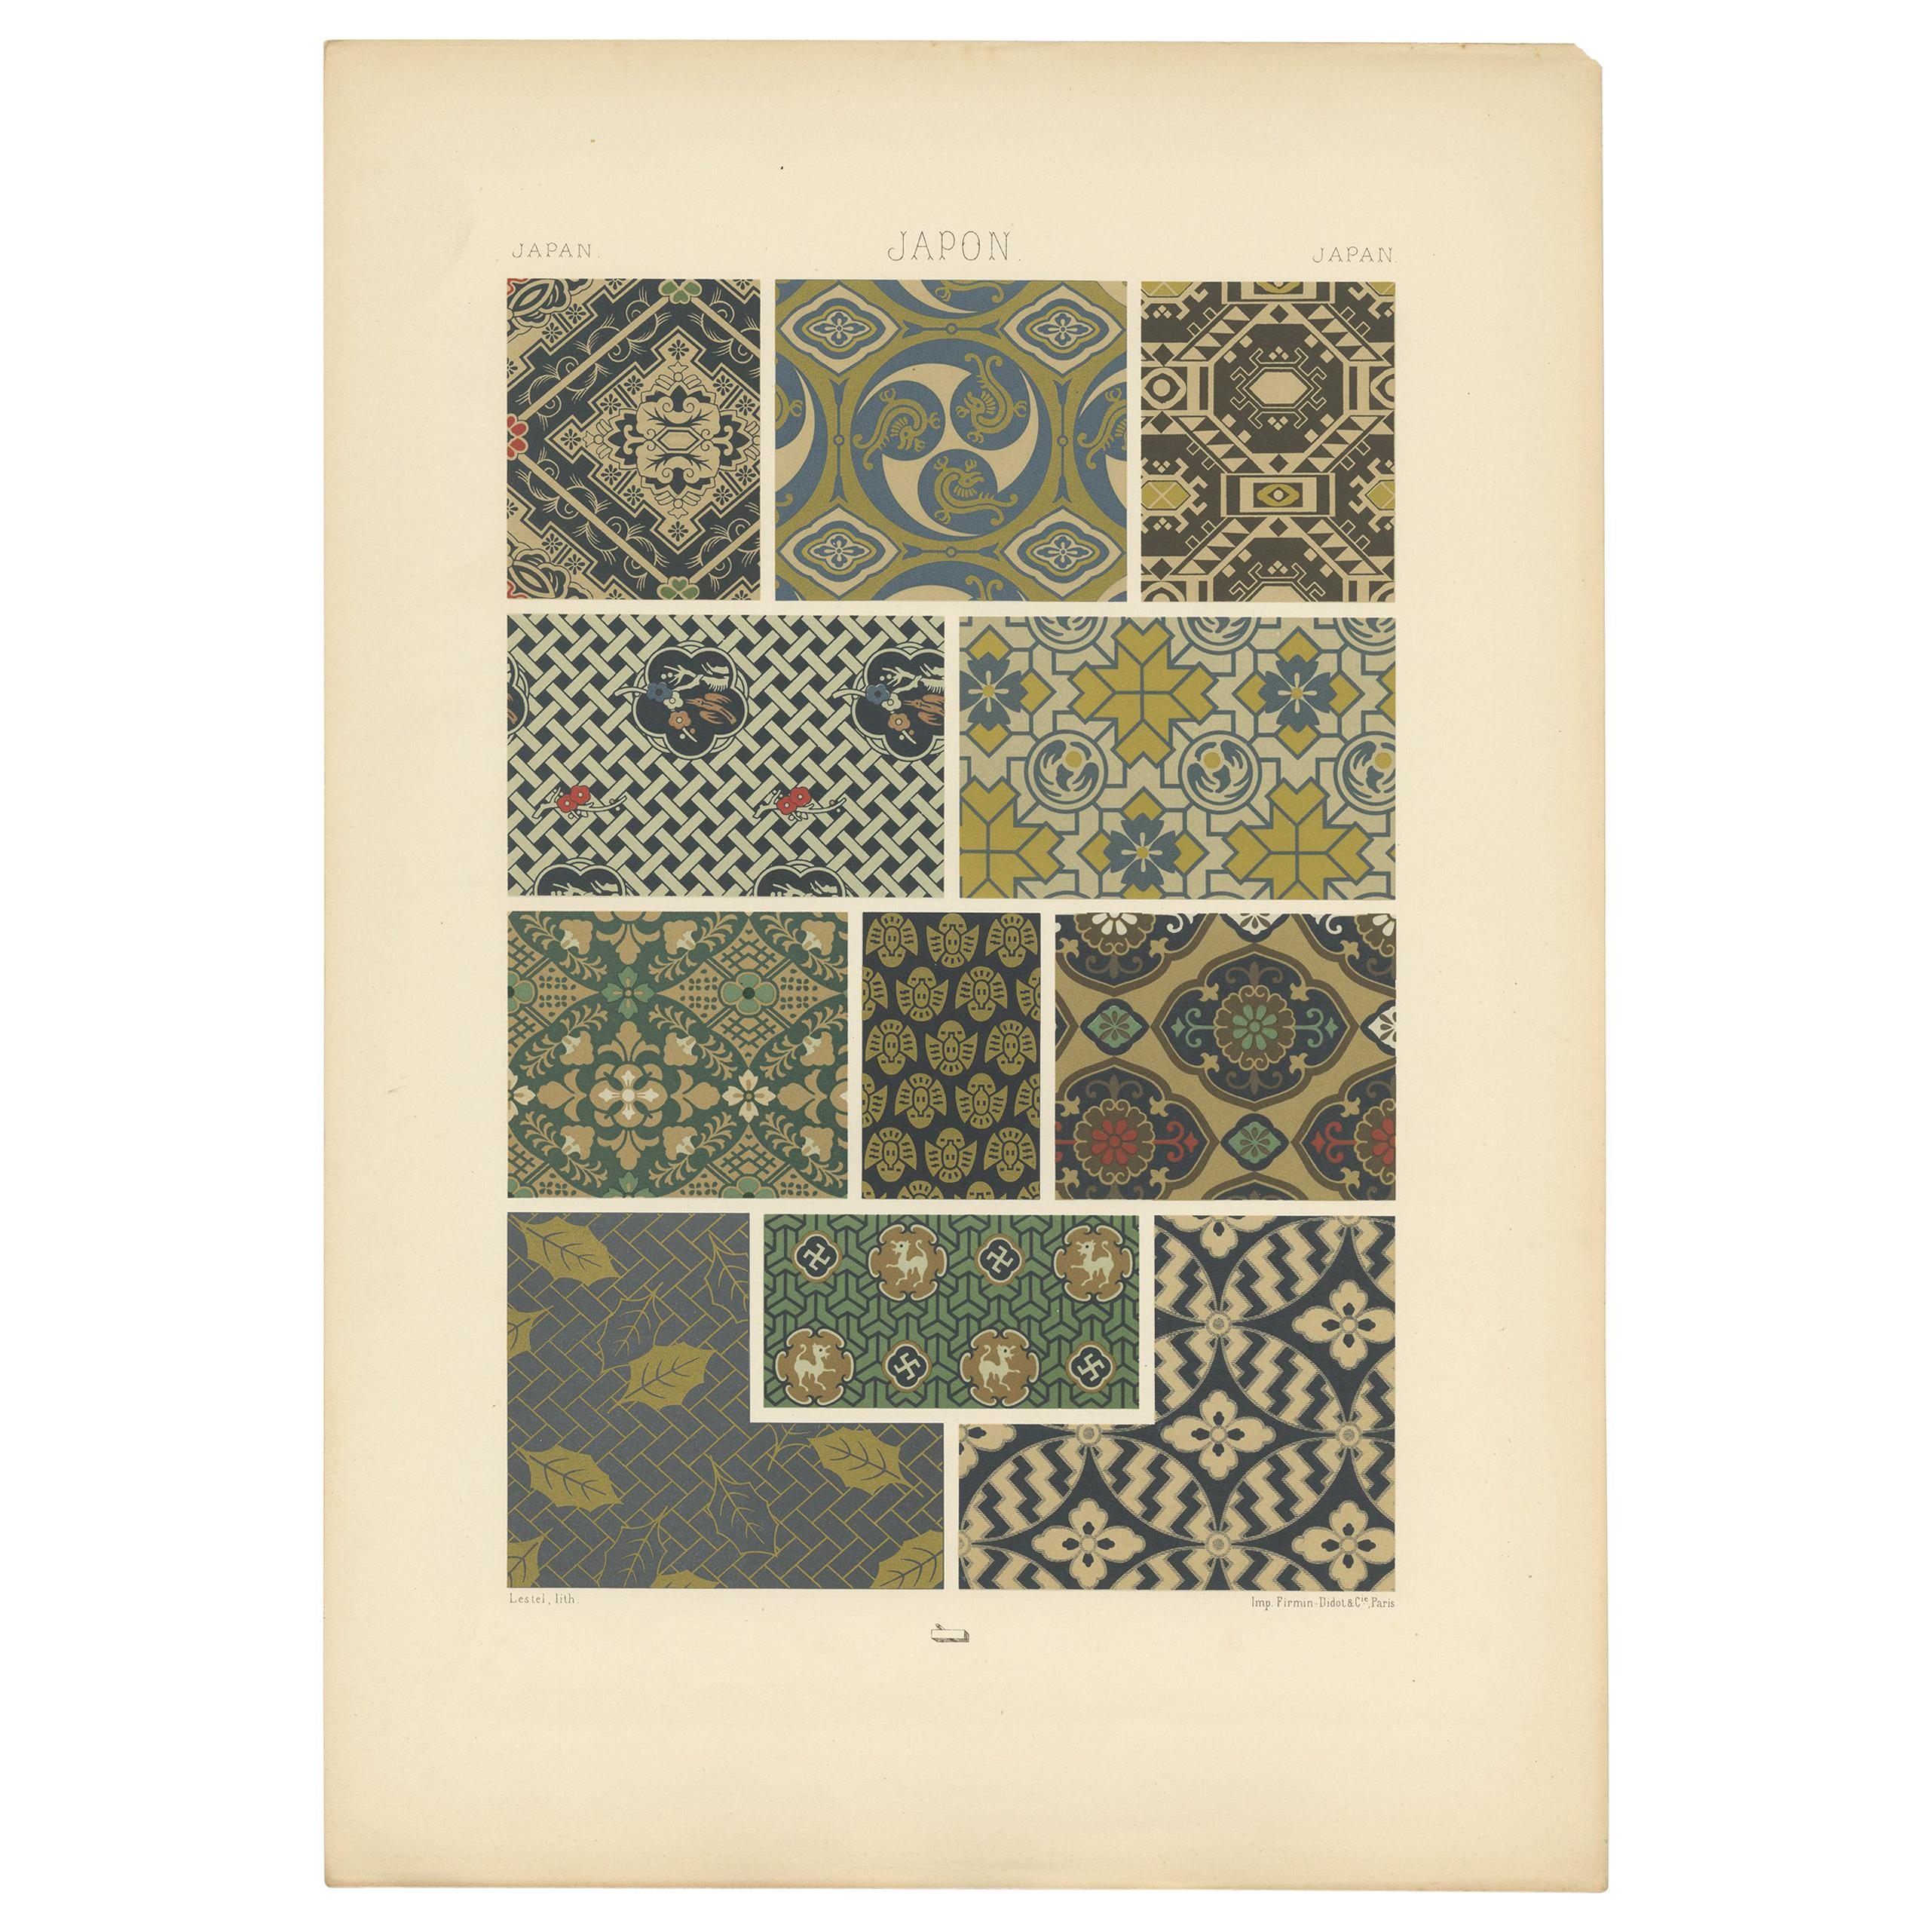 Pl. 12 Antique Print of Japanese Motifs and Textiles Ornaments by Racinet For Sale